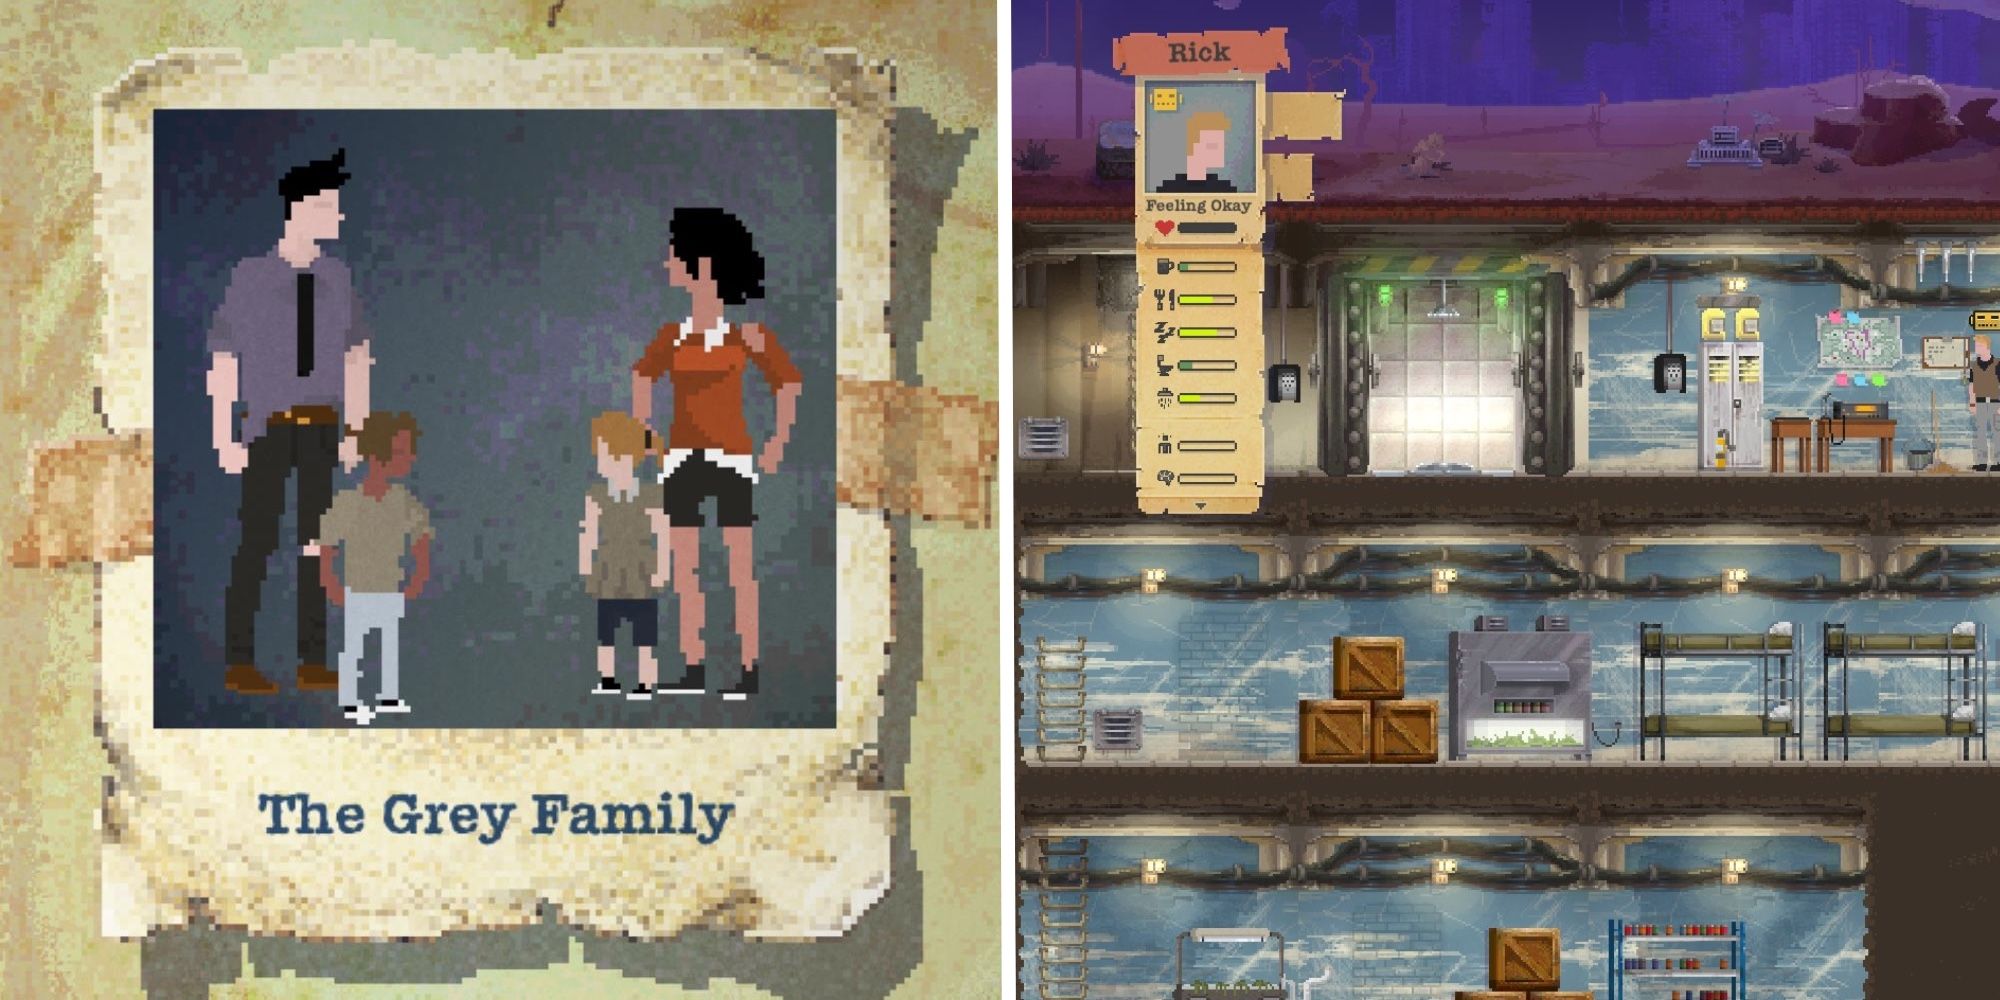 A complete family next to a complete shelter in Sheltered.